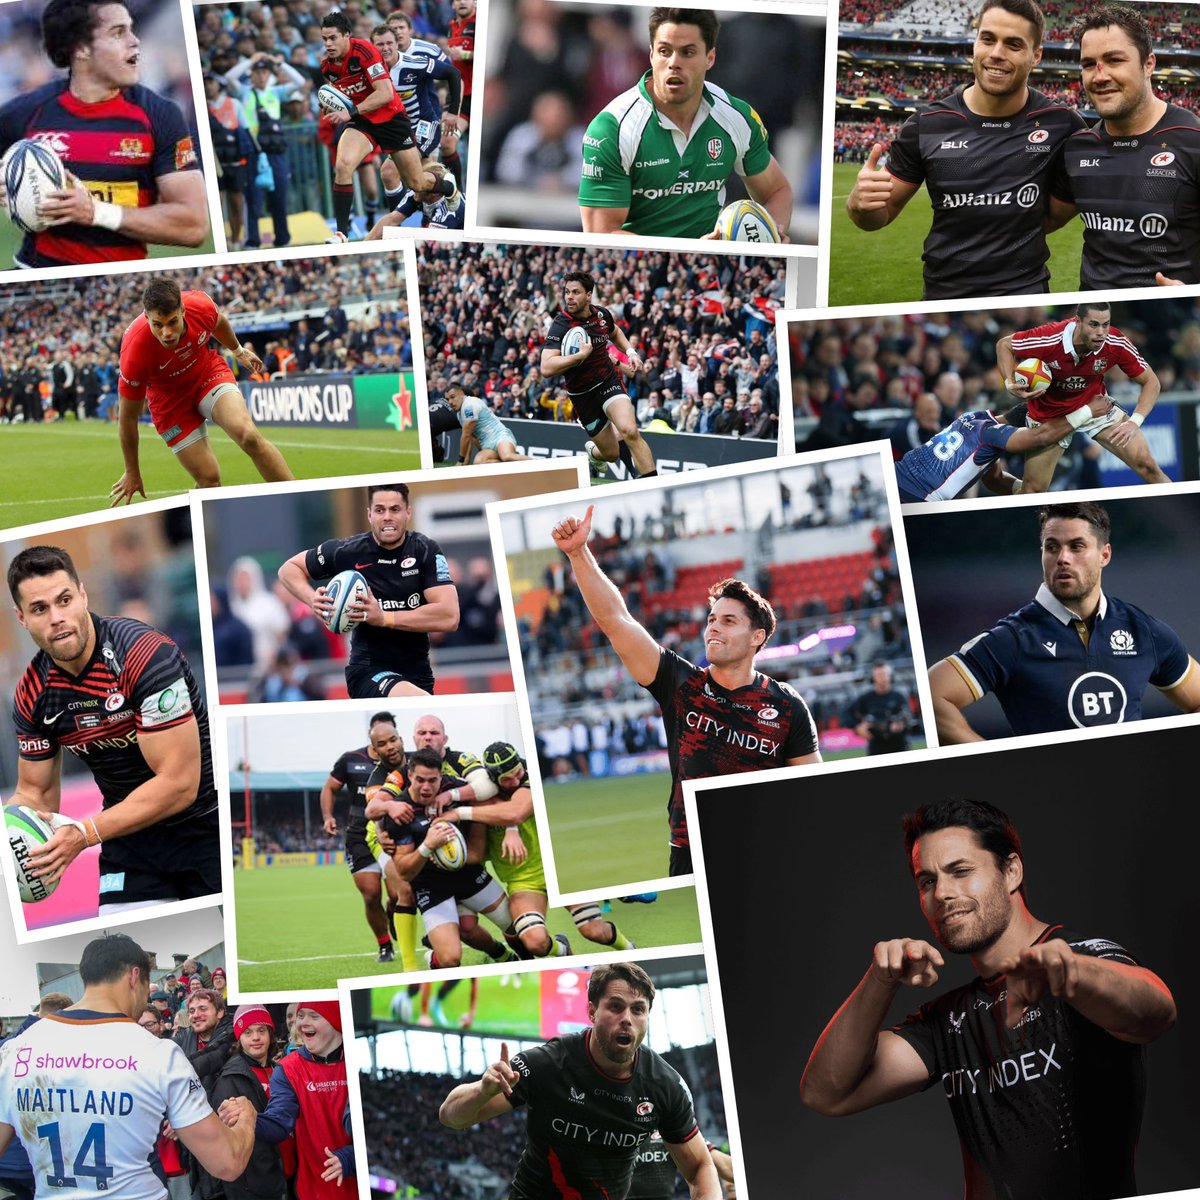 Very sorry to see Sean Maitland hanging up his boots this summer to and start his next adventure. Massive thanks for the amazing memories and very best wishes for all that comes next. Another legend leaves the scene. Hopefully that’ll be after winning the final at Twickenham ⚫️🔴